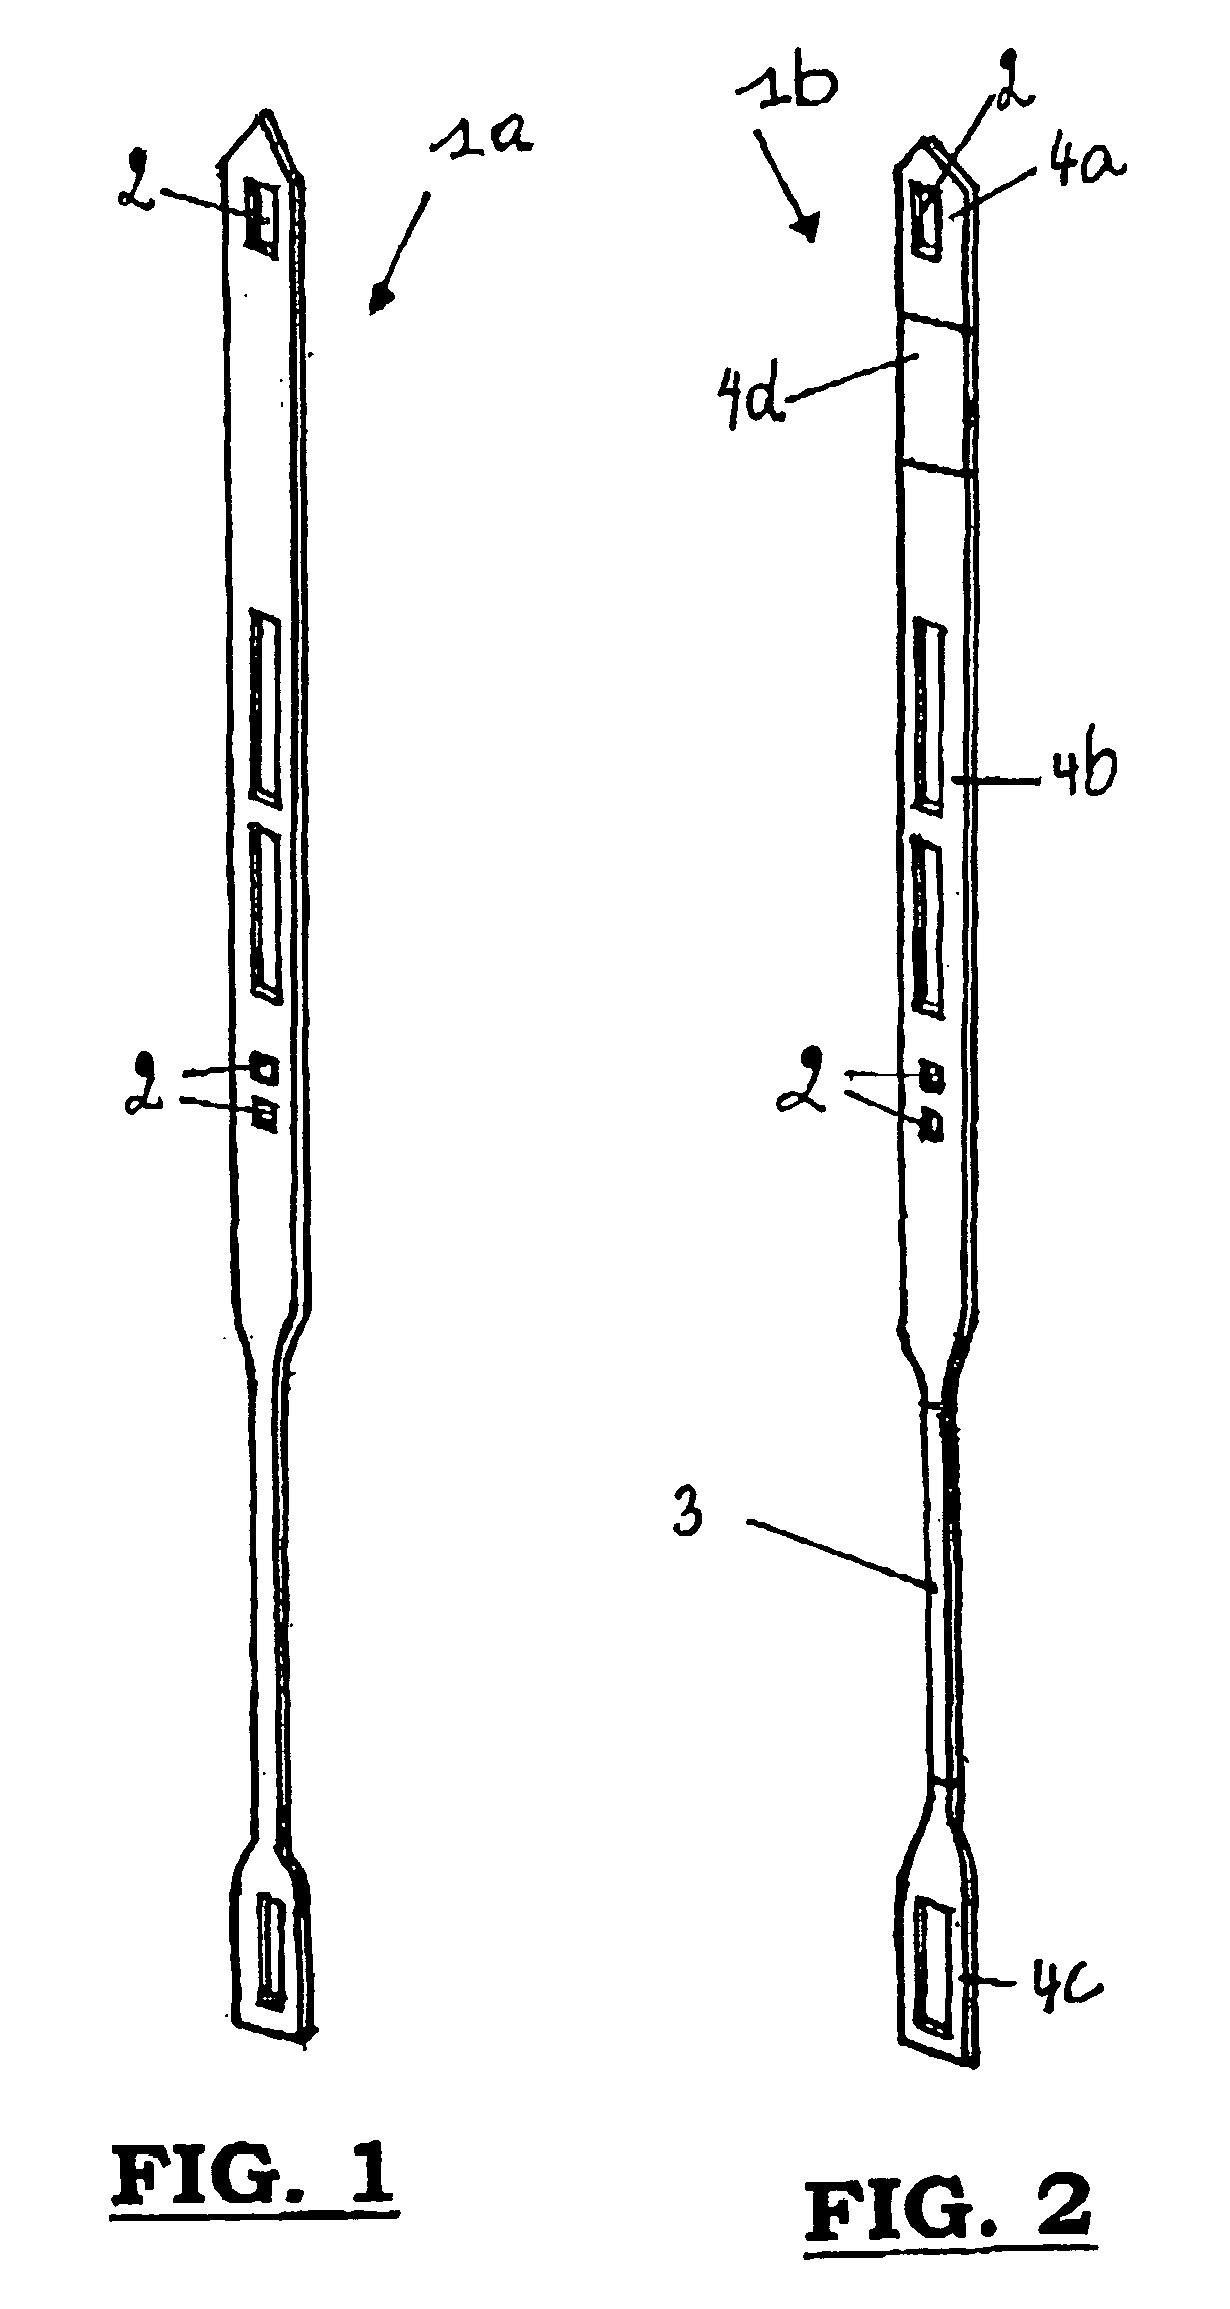 Method for manufacturing components consisting of one piece which appear in a weaving machine